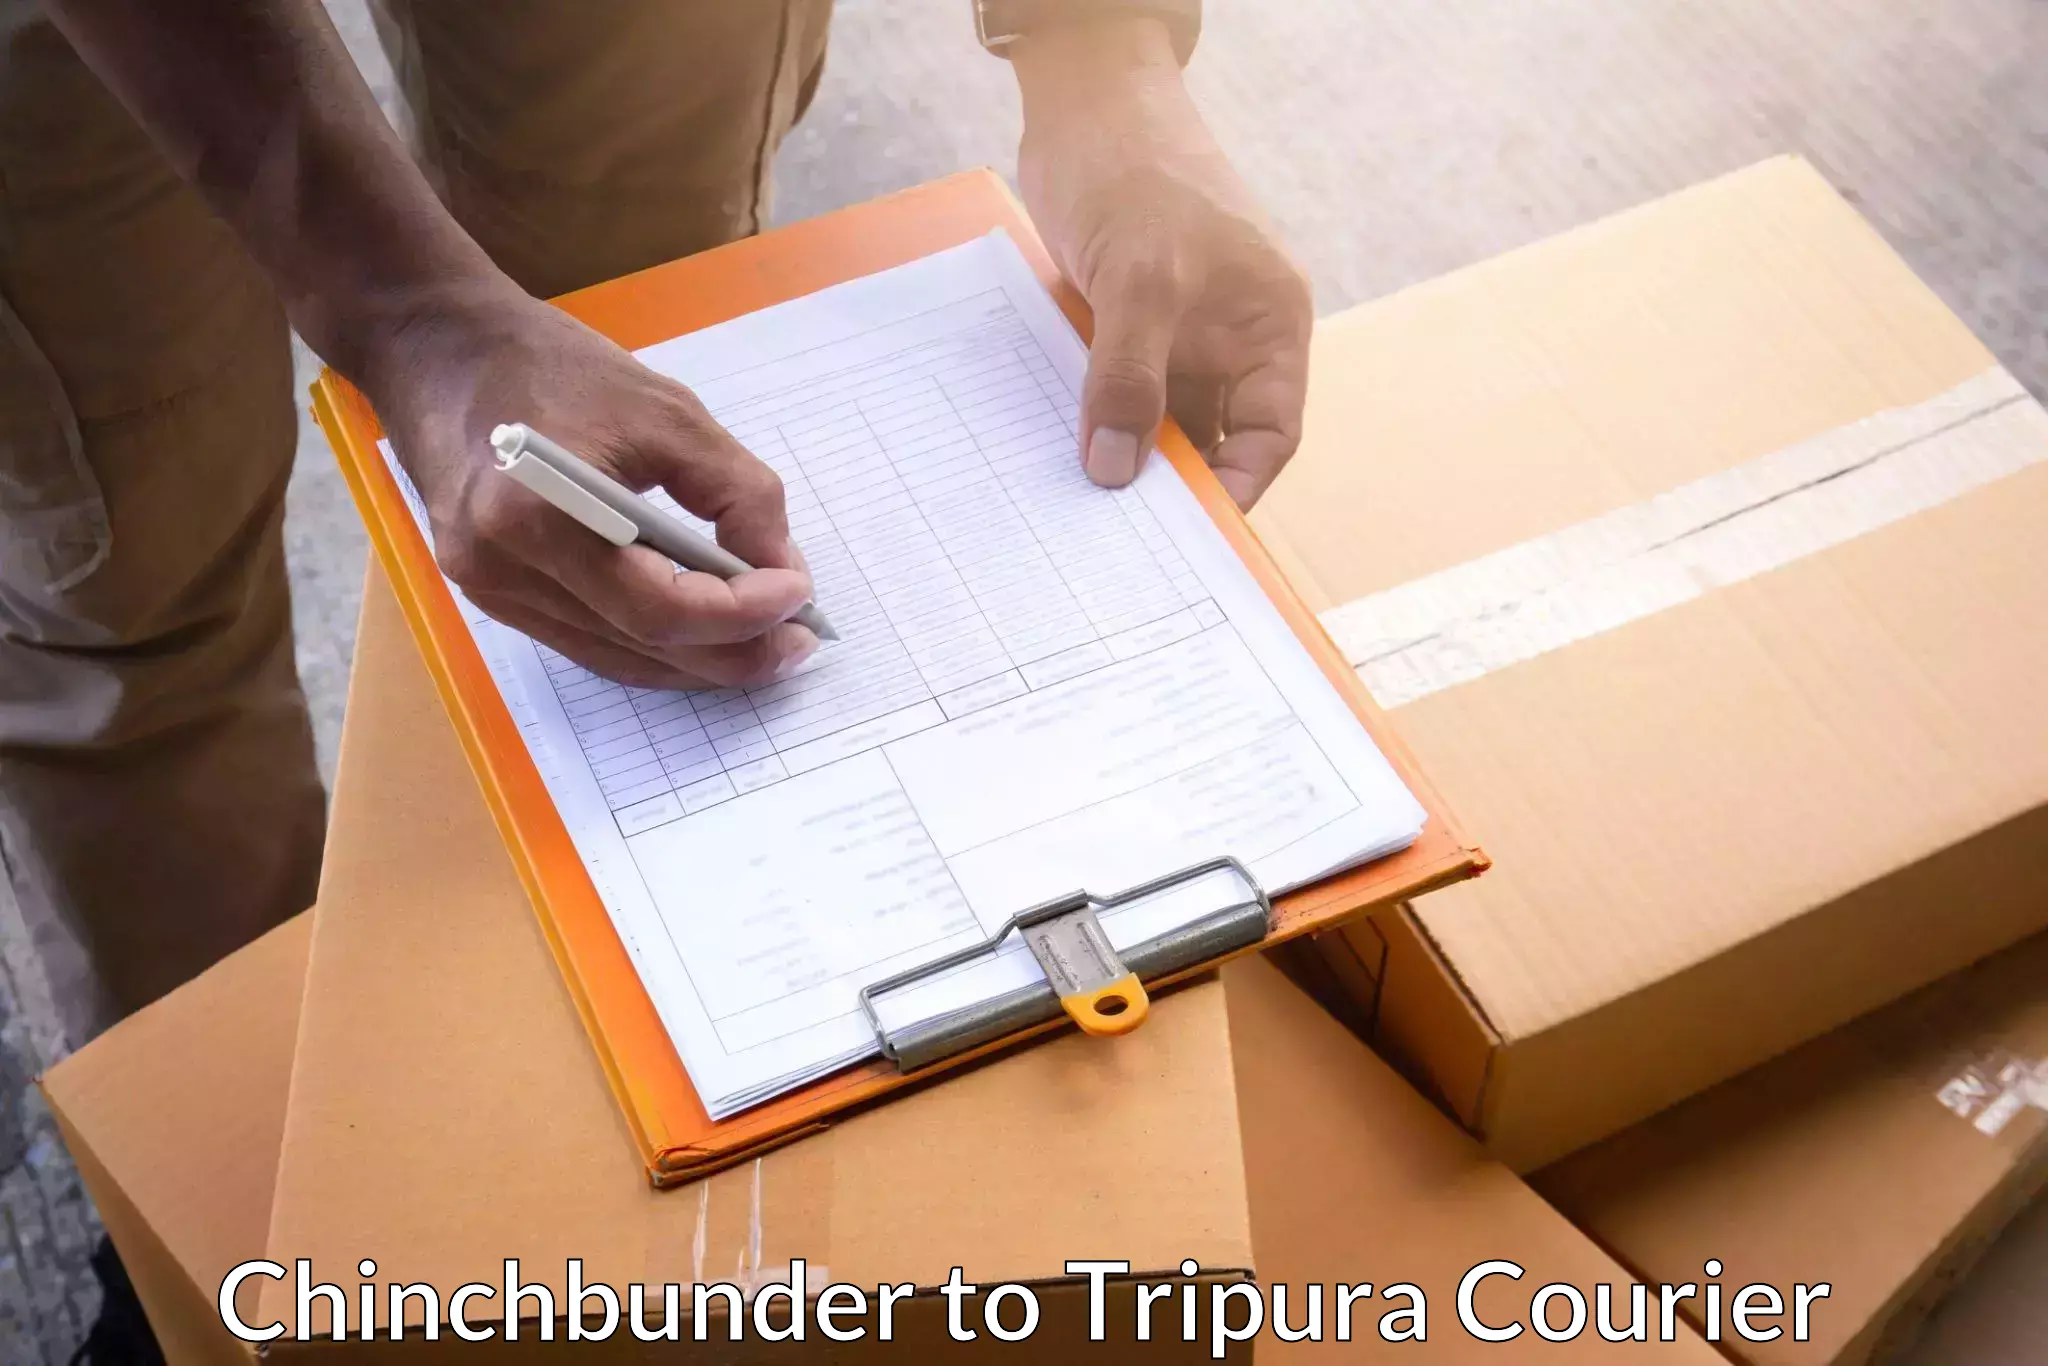 Quality courier services in Chinchbunder to Agartala